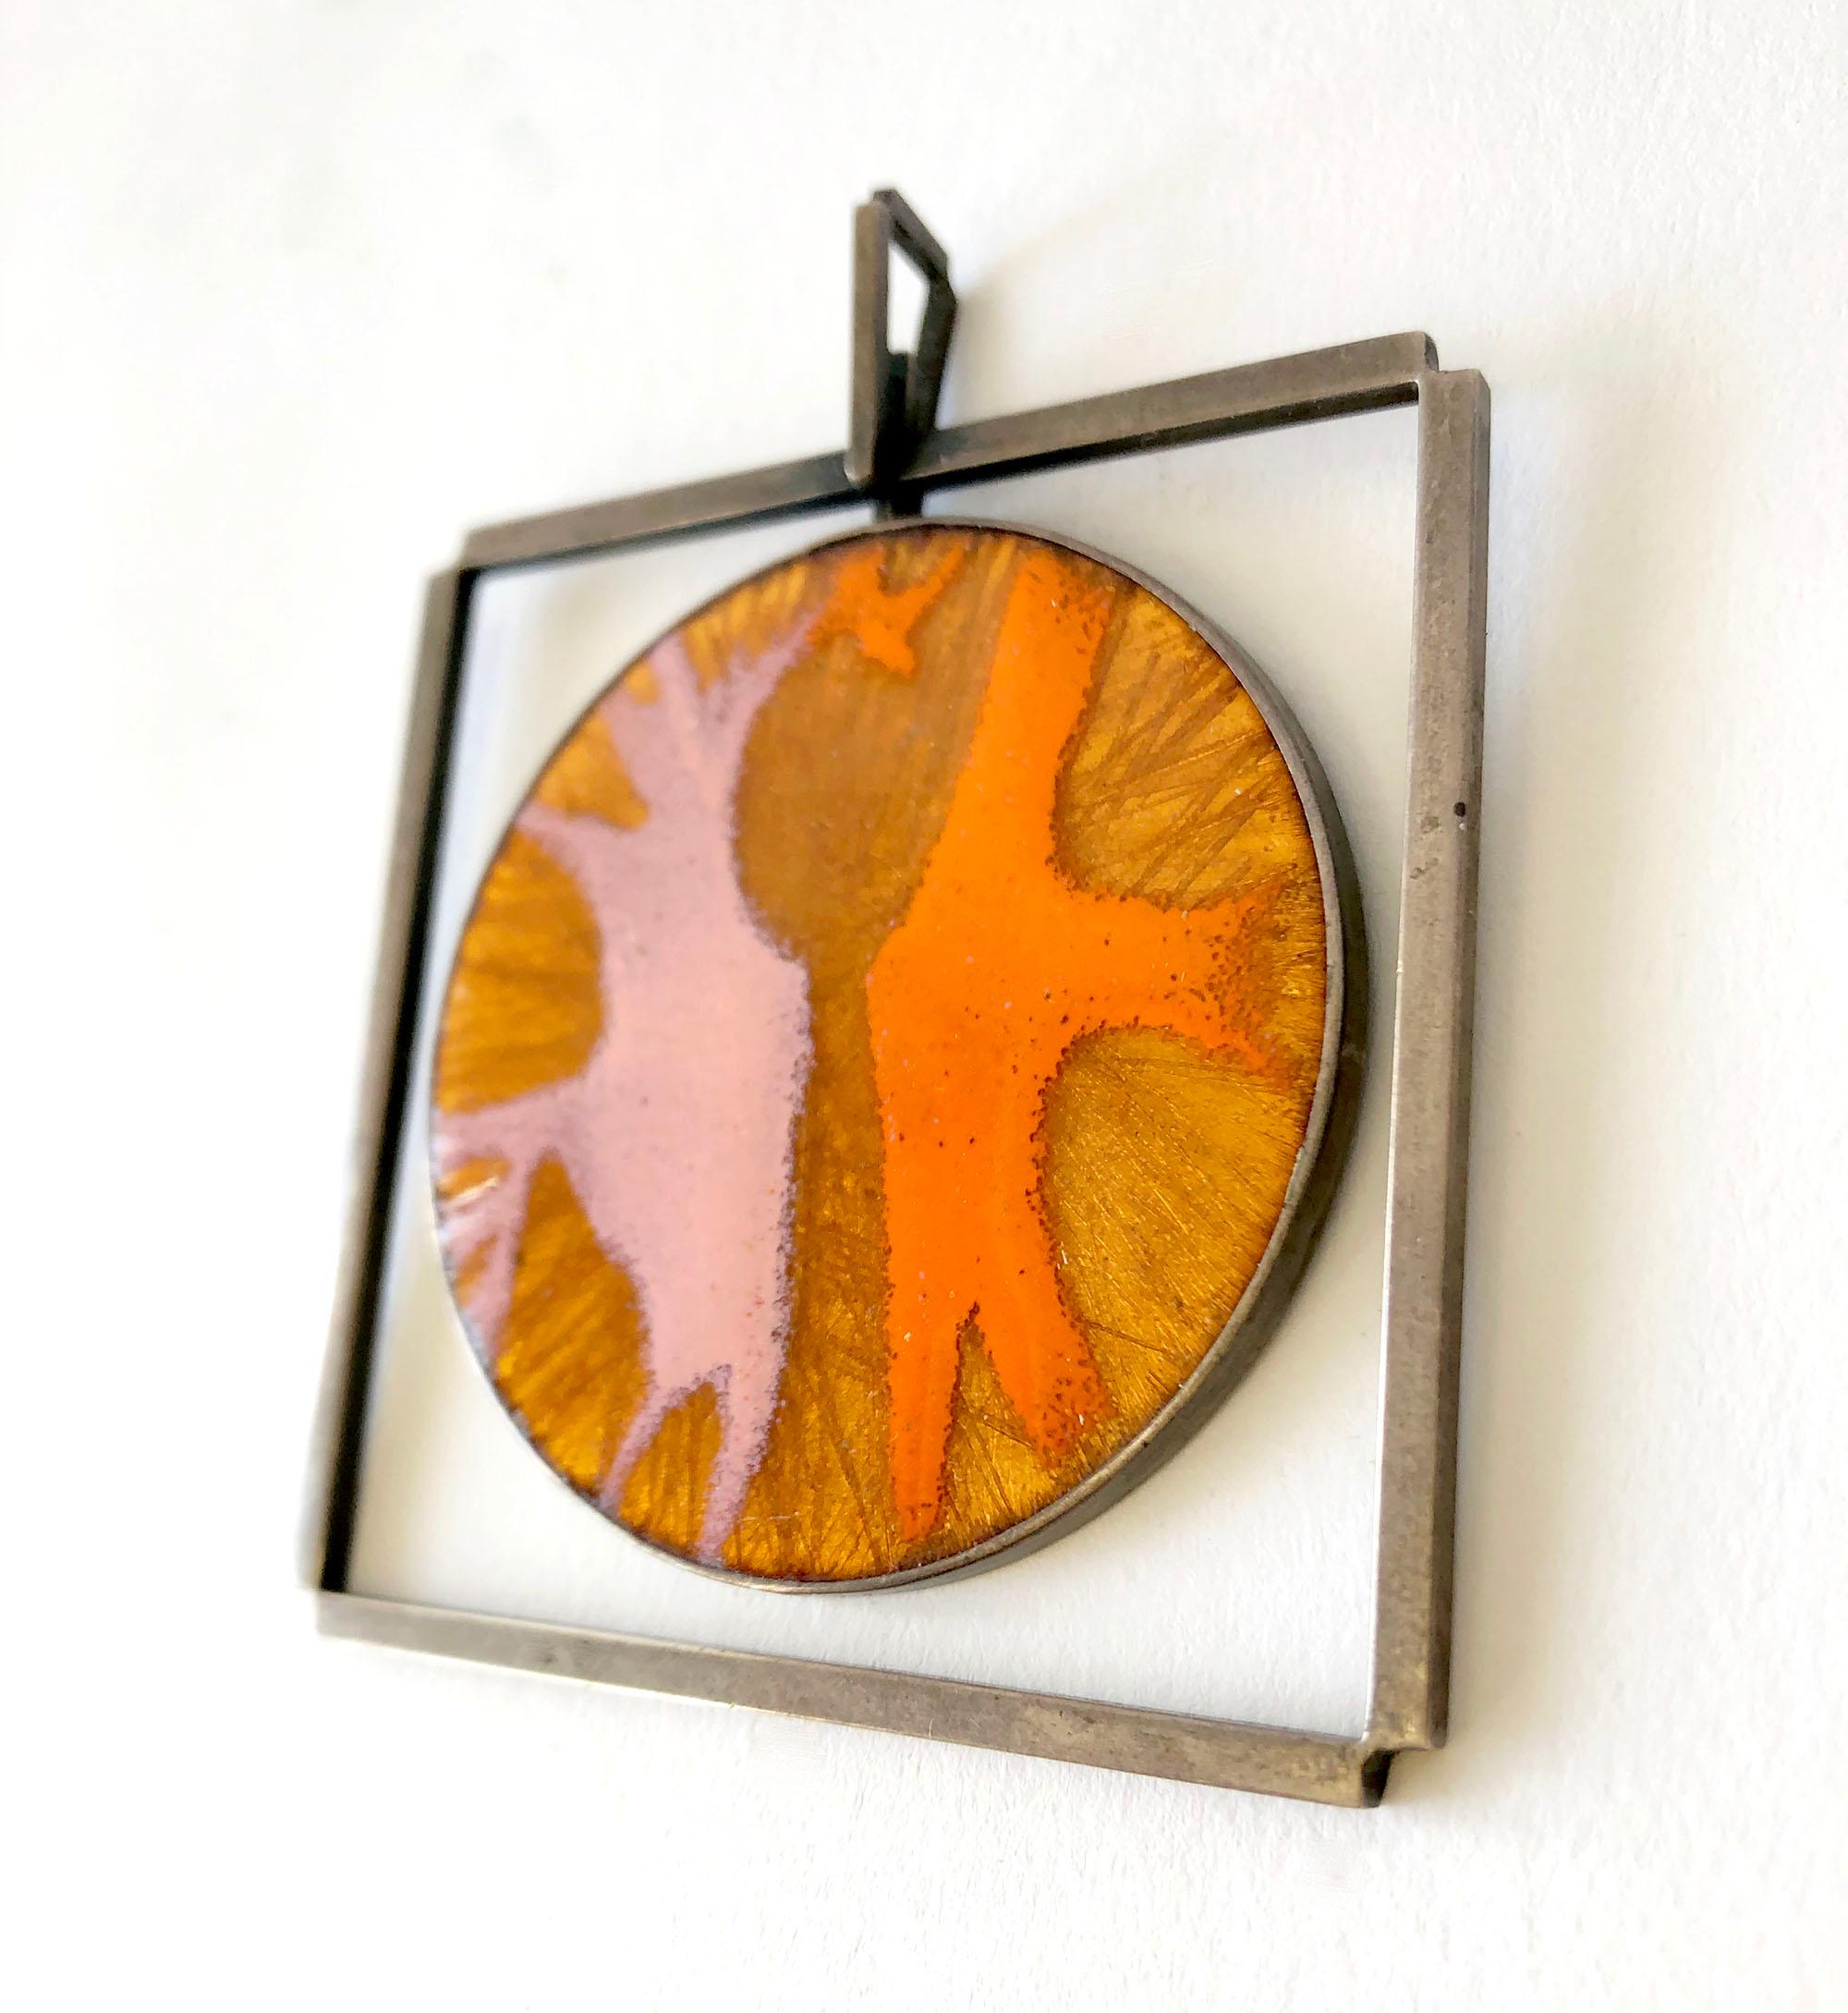 One of a kind sterling silver and orange and pink enamel kinetic modernist pendant created by James Parker of San Diego, California.  Pendant measures 3